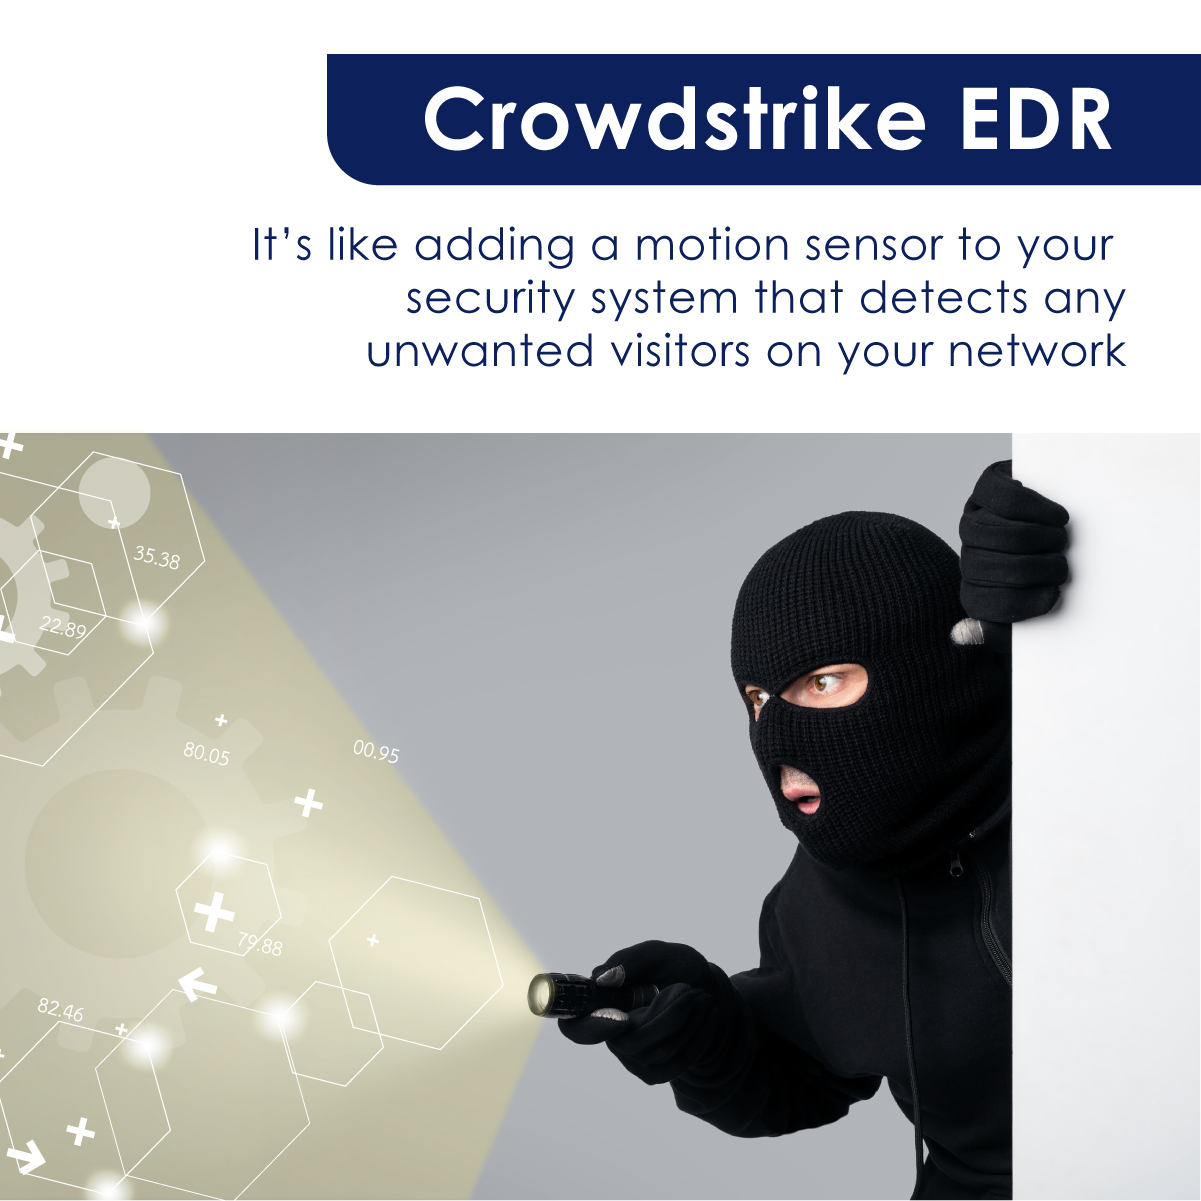 Crowdstrike endpoint detection and response is like adding a motion sensor to your security system that detects any unwanted movement inside your home. 